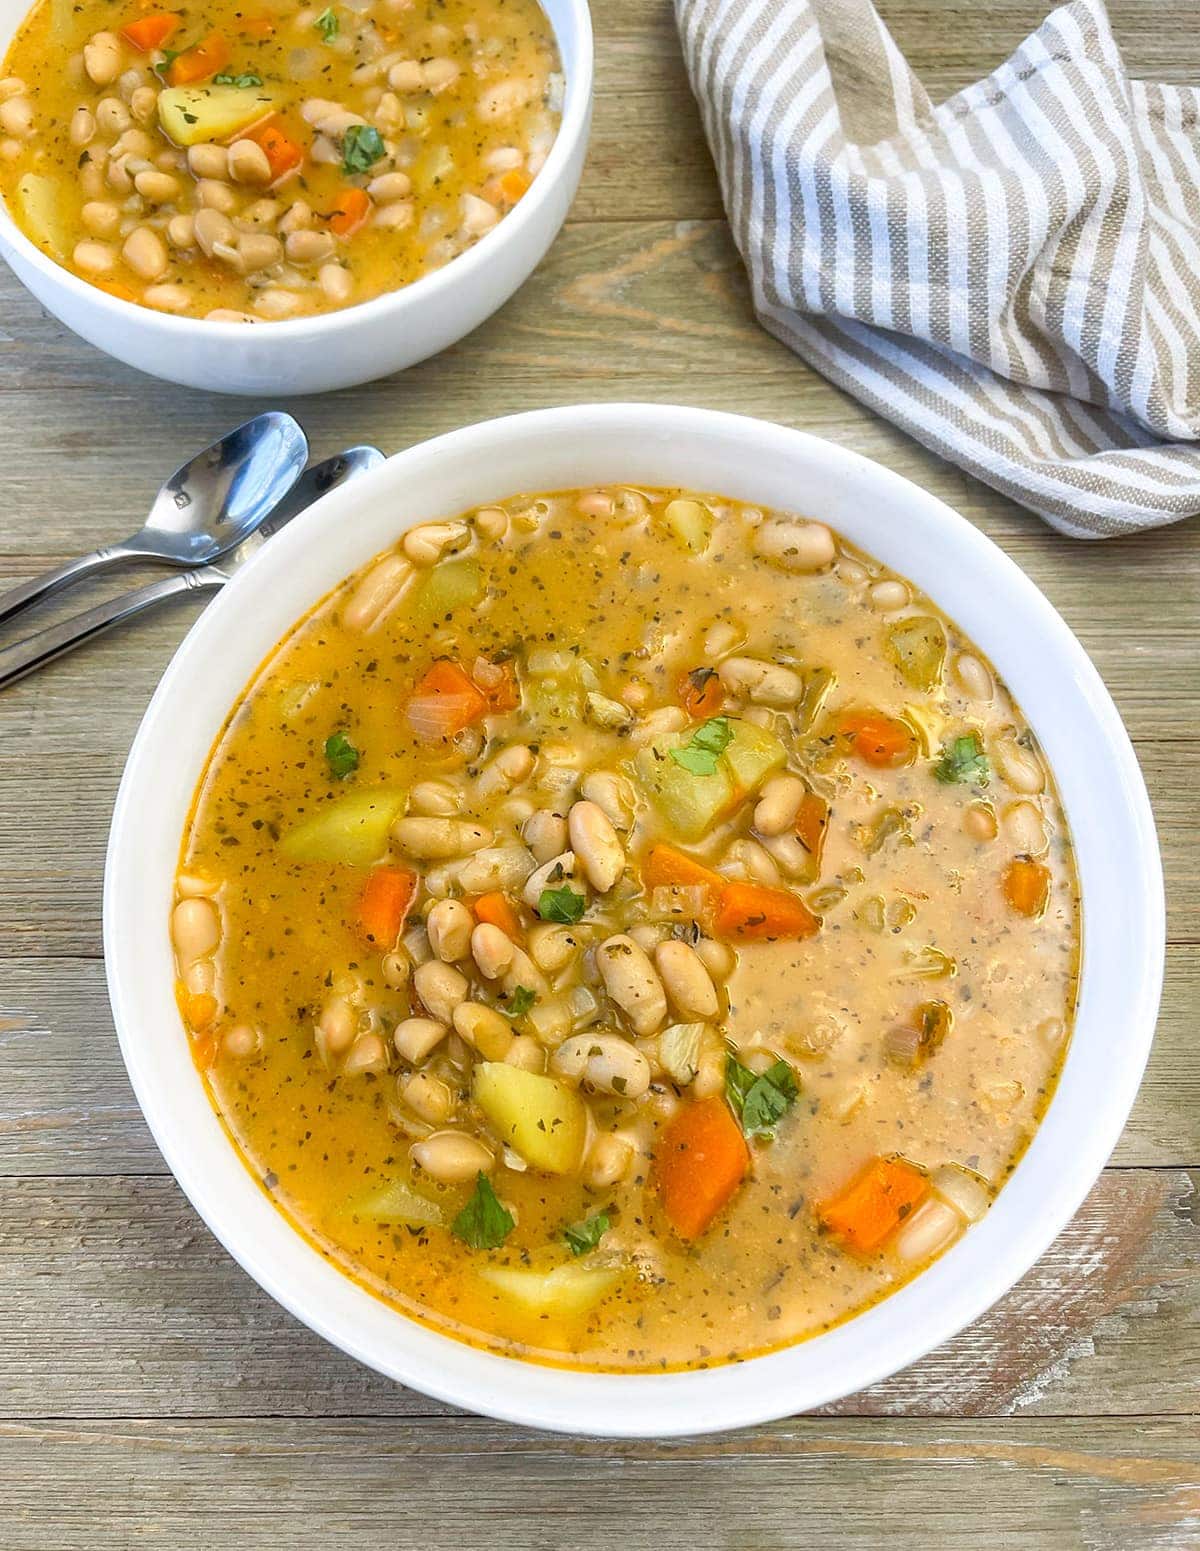 White Bean Soup with Carrots, Potatoes and Spices in a Bowl